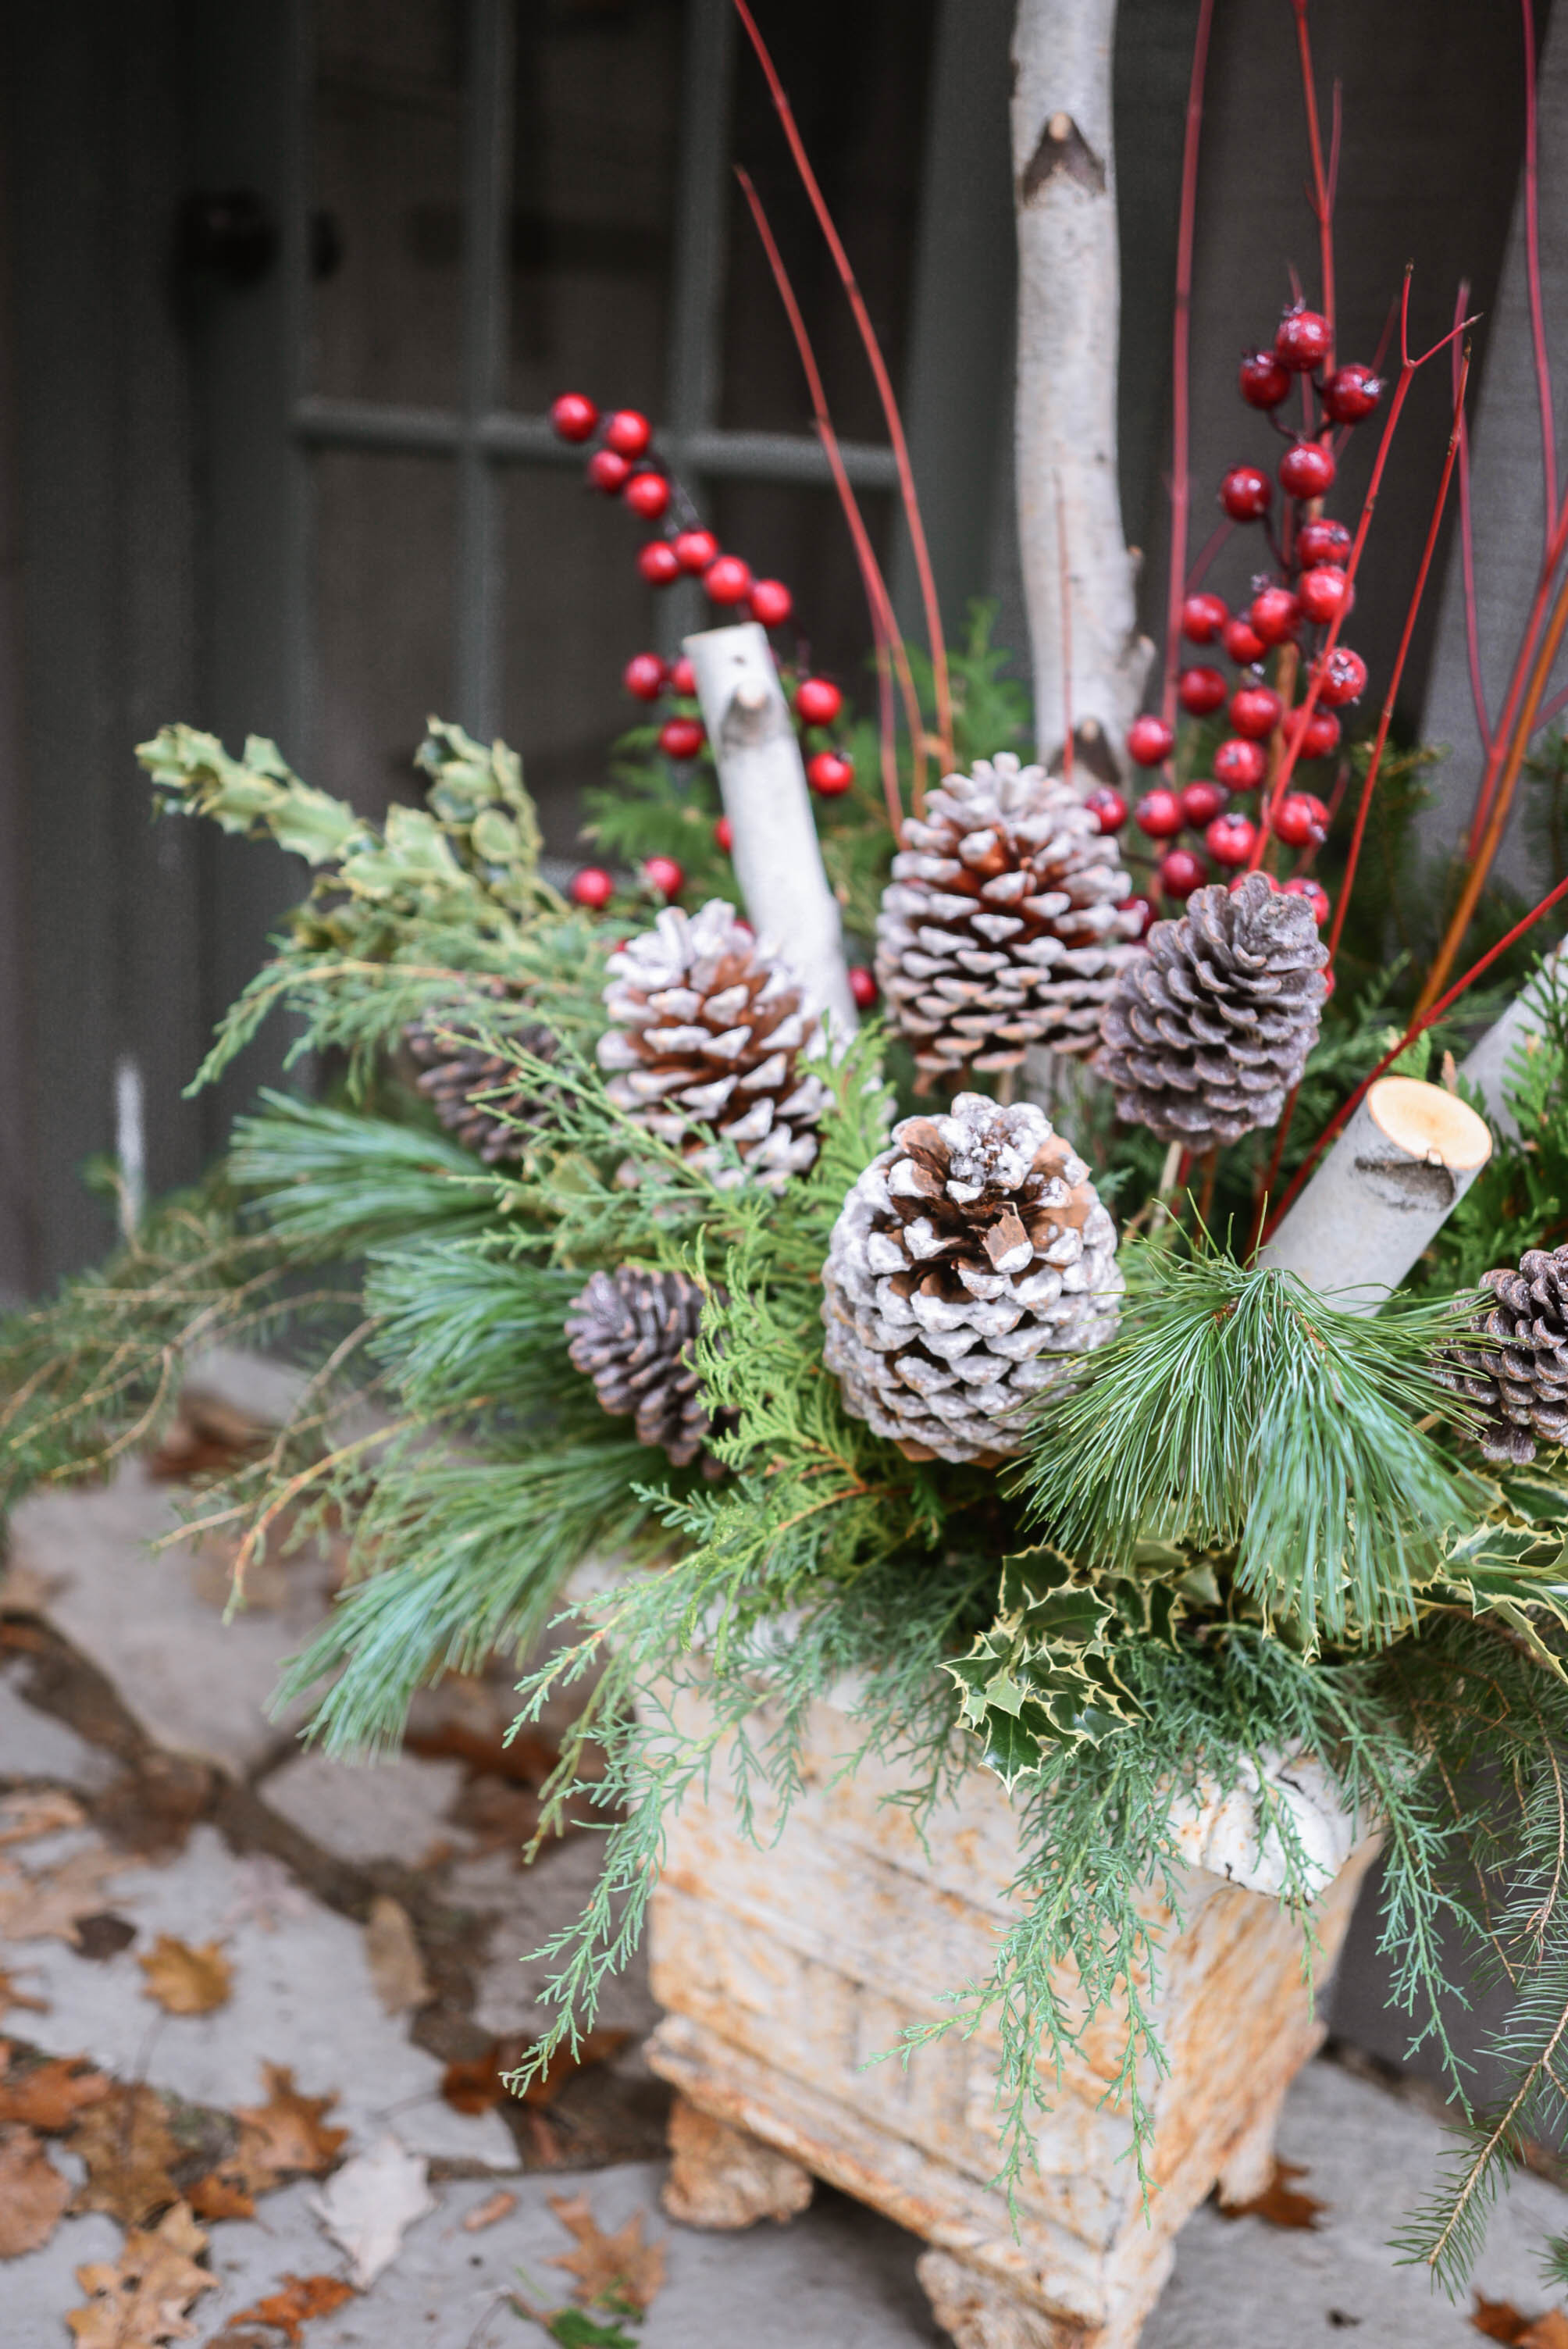 Outdoor Christmas Planters
 How to Make Outdoor Christmas Planters using Evergreen